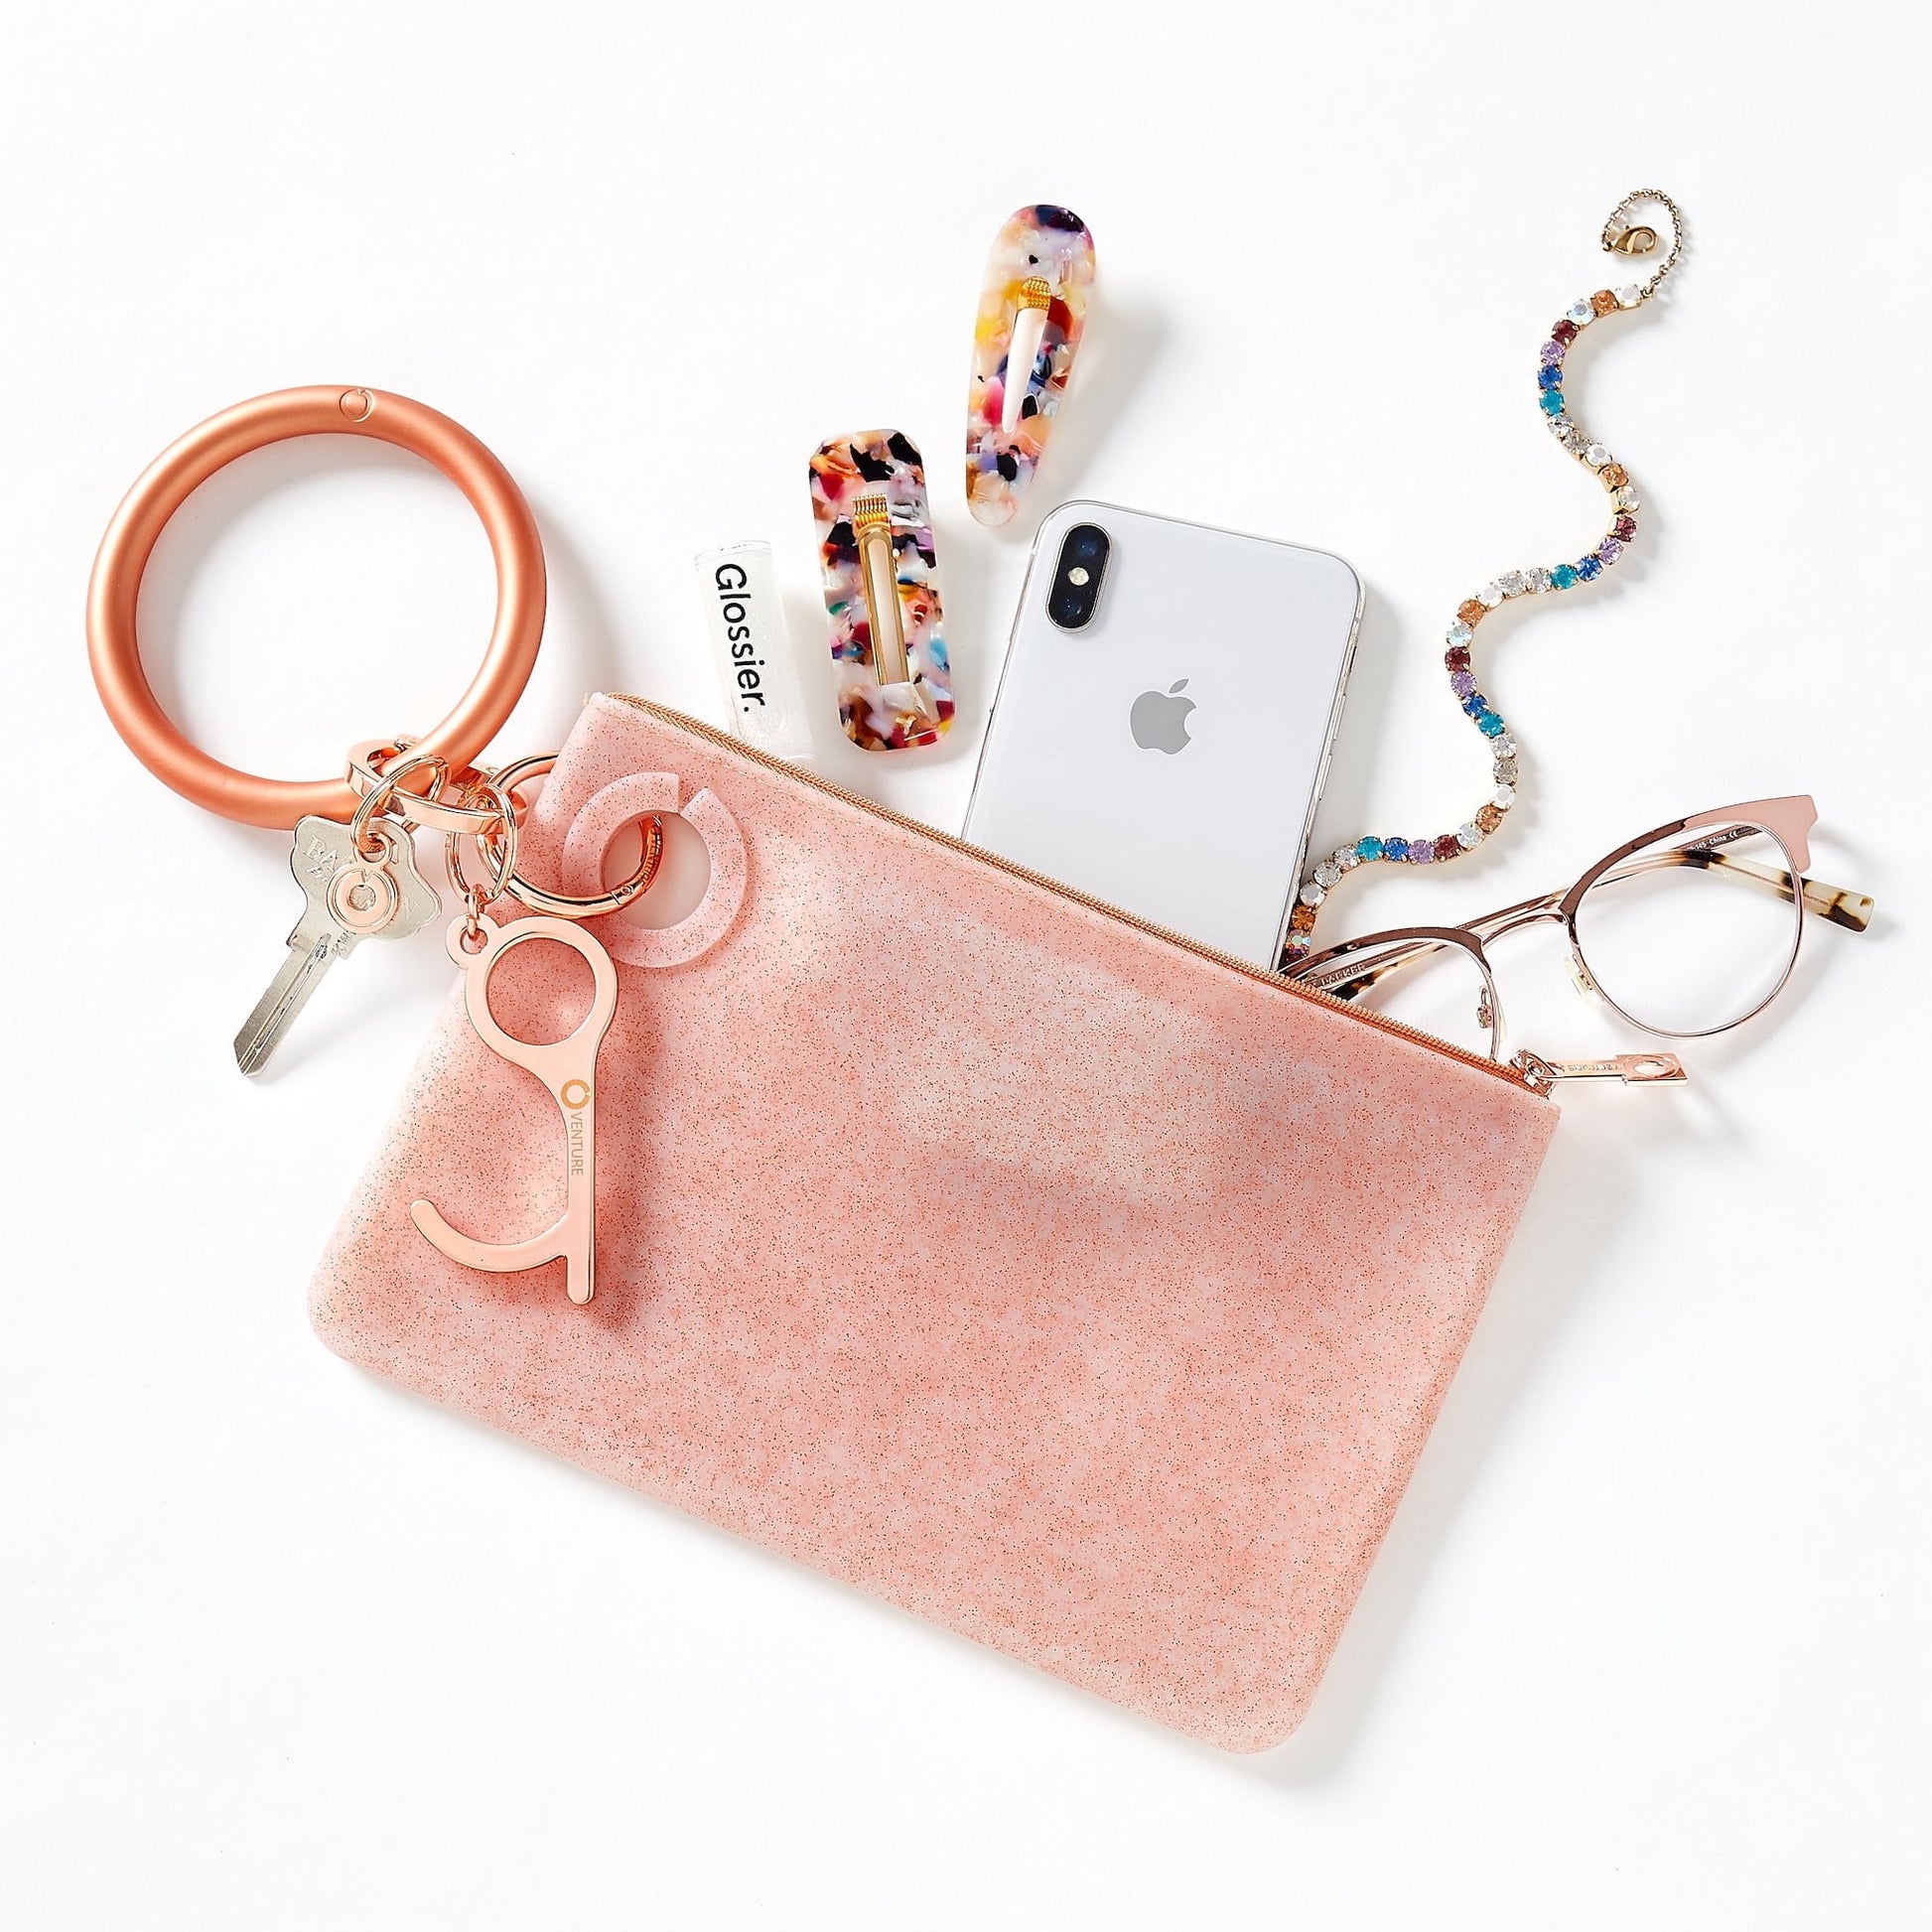 Solid Rose Gold Pearlized - Silicone Big O Key Ring - Oventure